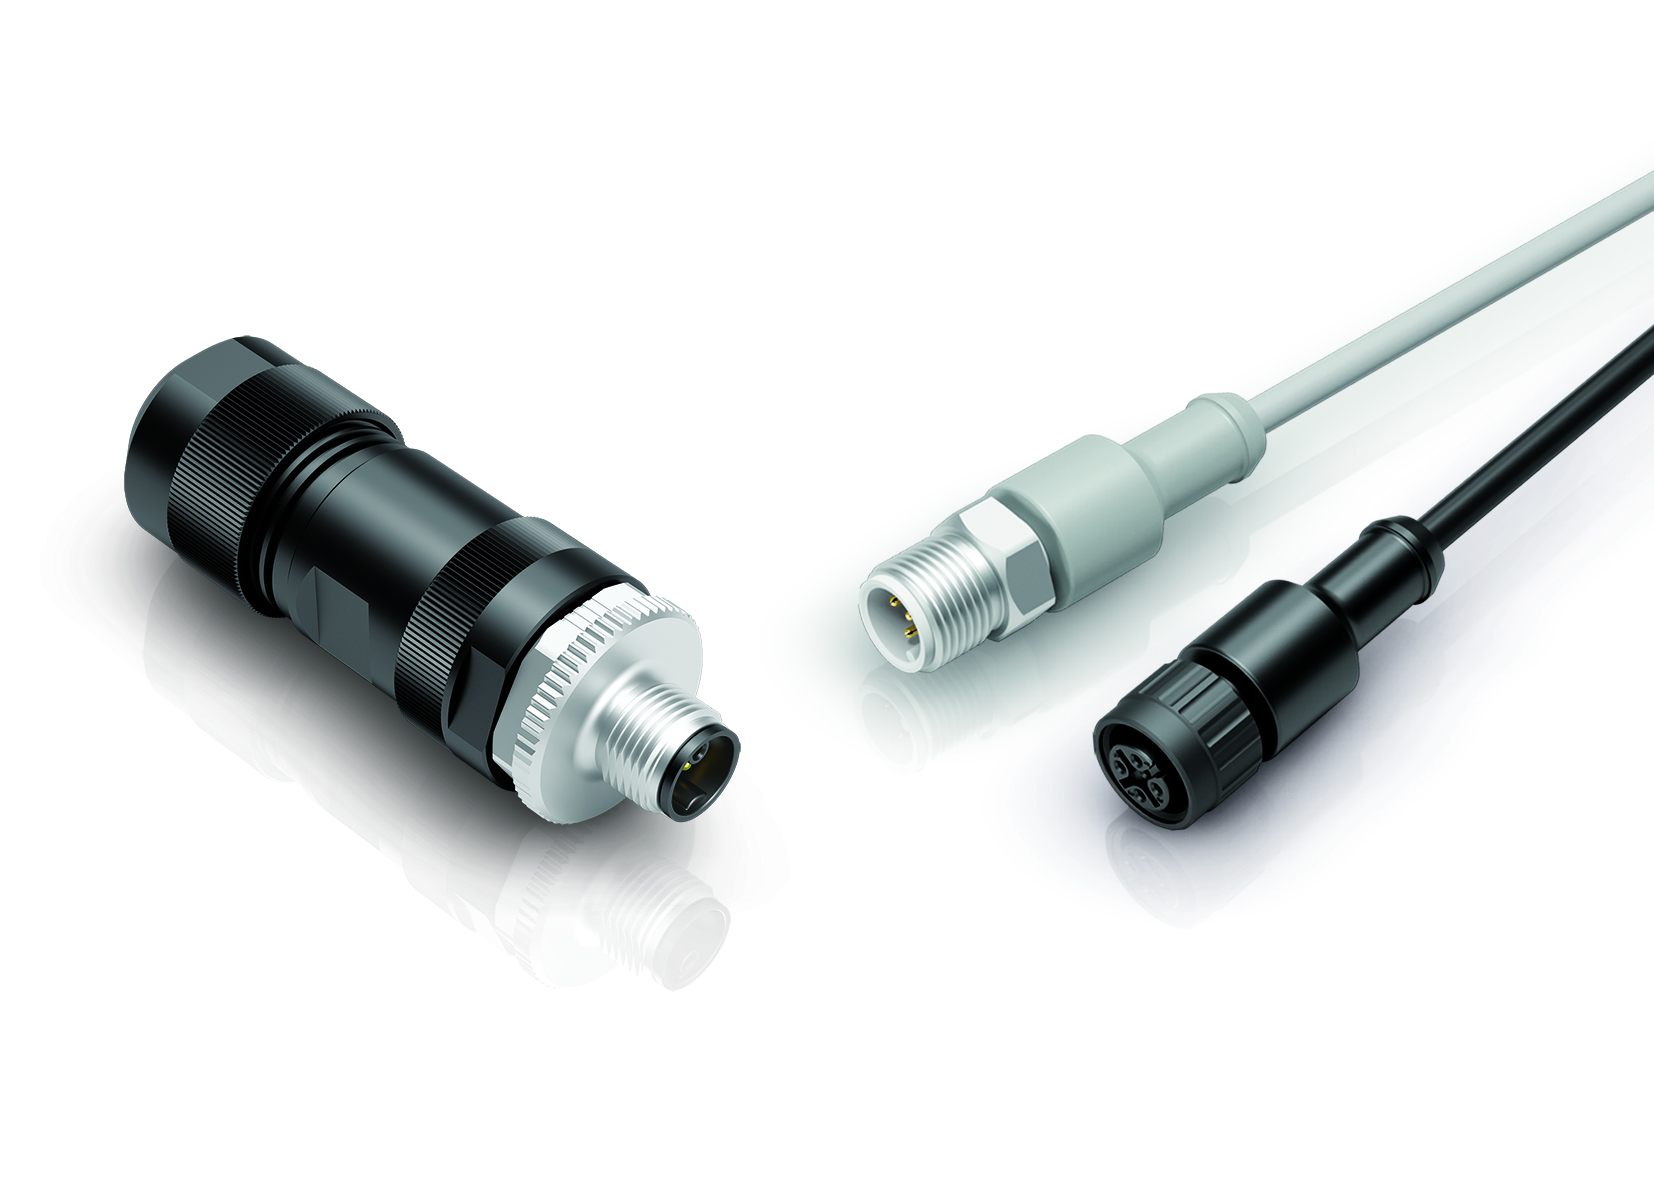 Expansion of M12 Connector Portfolio  with New Push-Pull Locking Options and Hybrid One-Cable Solutions